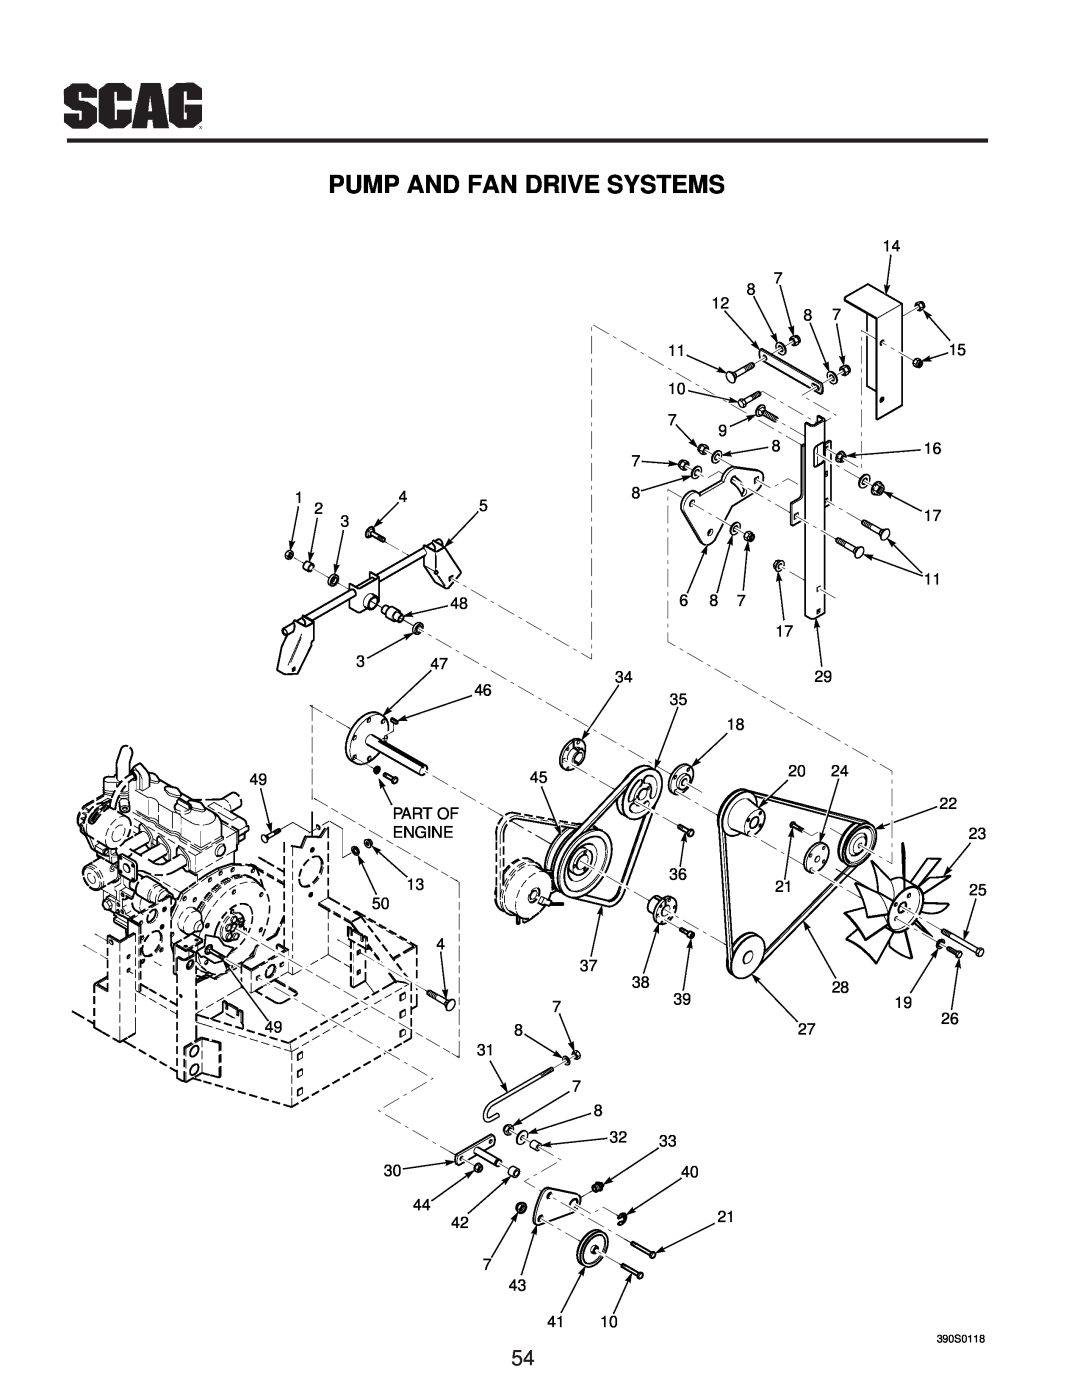 Scag Power Equipment MAG manual Pump And Fan Drive Systems, Engine, Part Of, 390S0118 